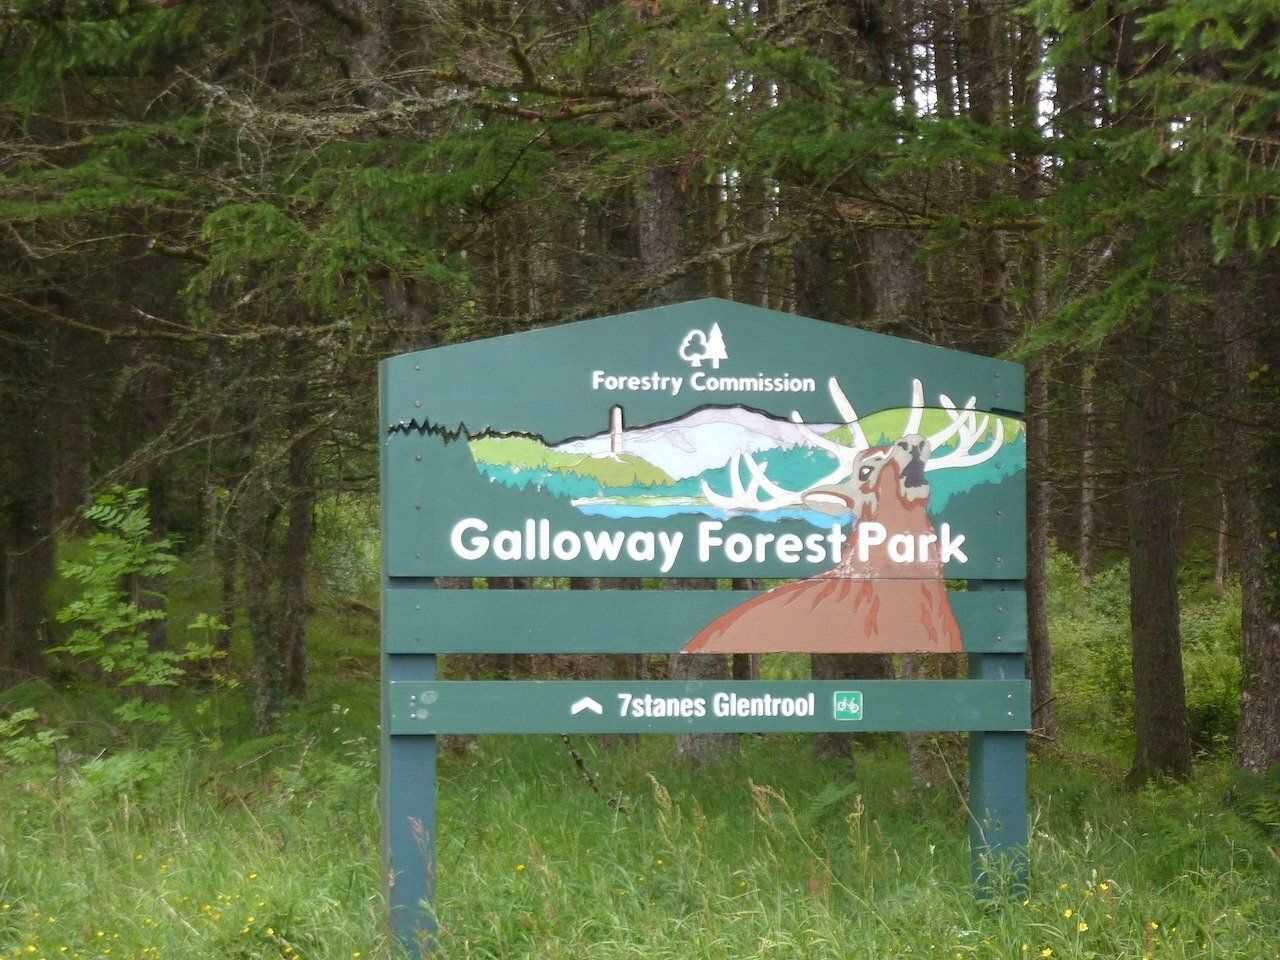 Galloway Forest Park, south west Scotland